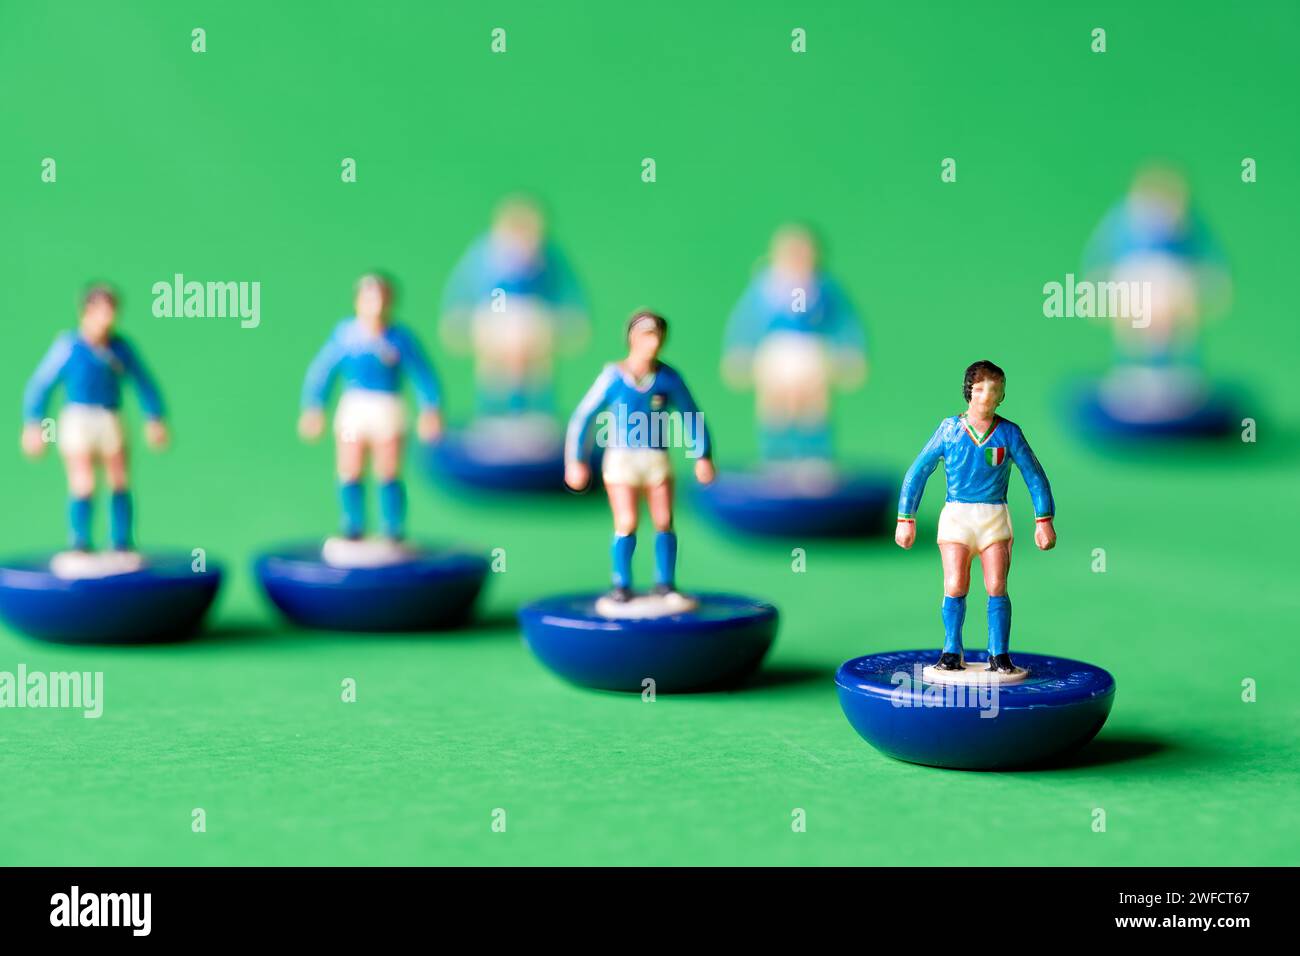 A group of Subbuteo miniature figures painted in the Italy national team colours of blue shirt and white shorts. Subbuteo is a tabletop football game Stock Photo